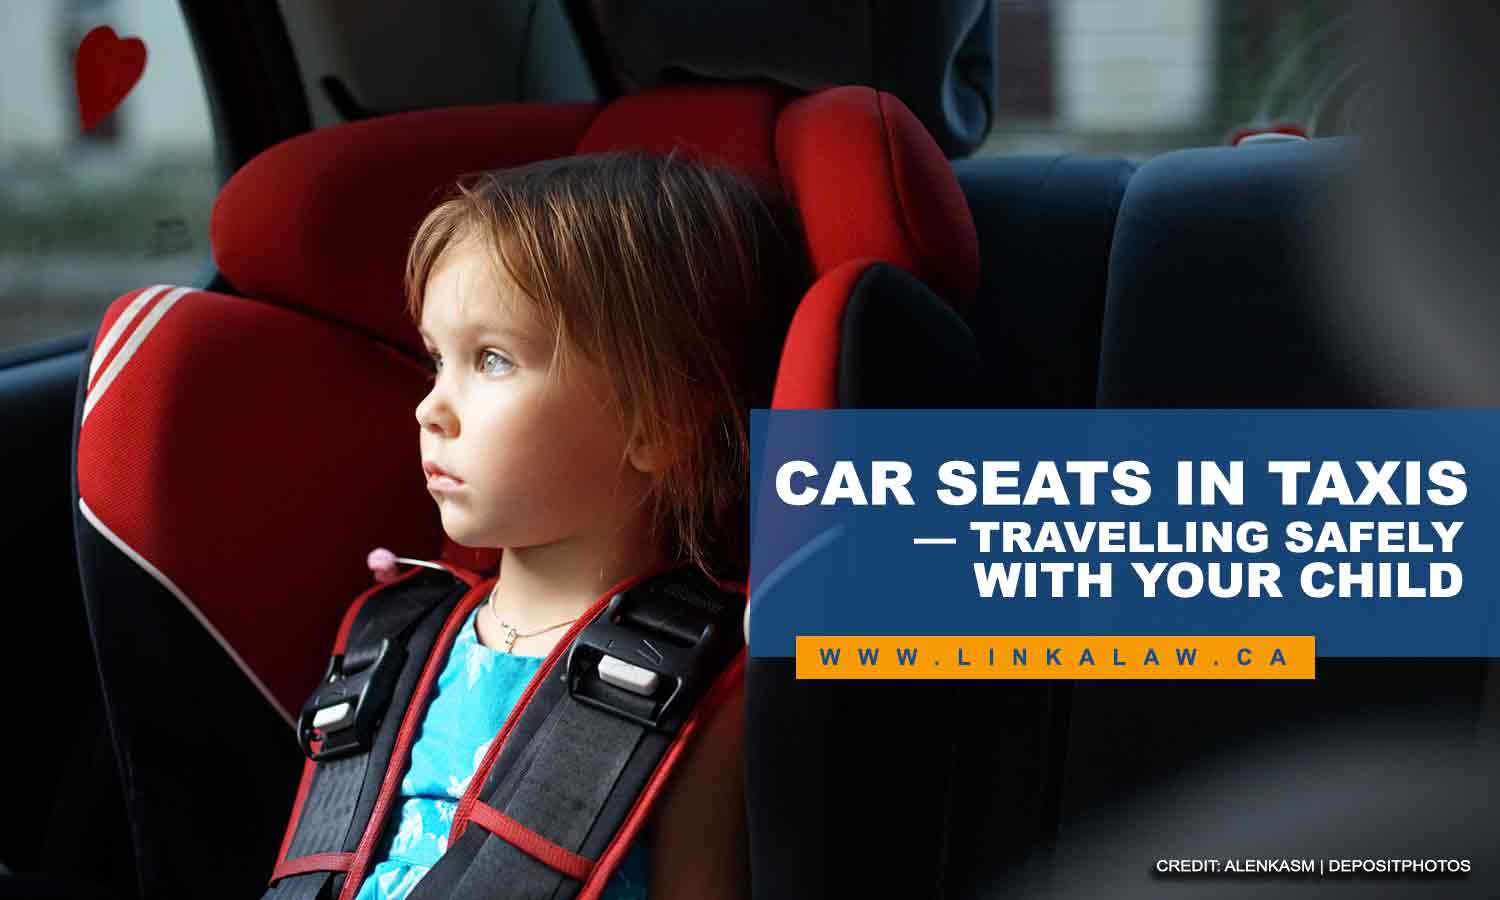 Car Seats in Taxis — Travelling Safely With Your Child